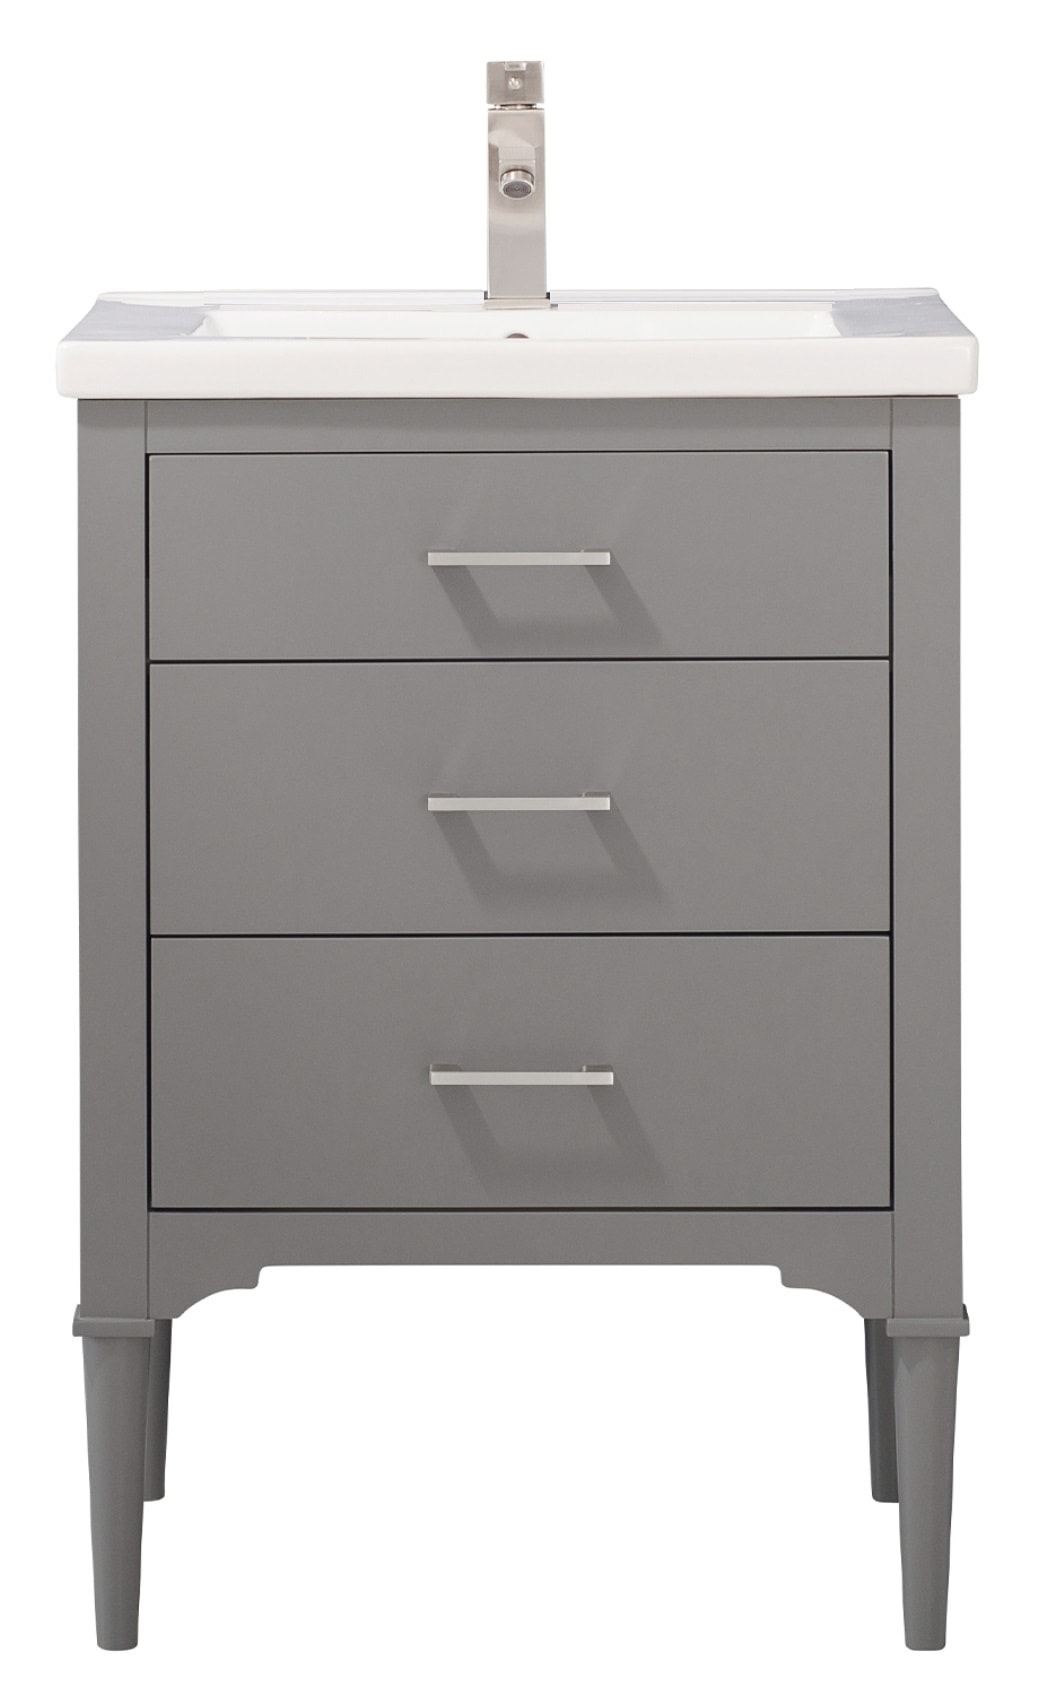 Mason 24-in Gray Single Sink Bathroom Vanity with White Porcelain Top | - Design Element S01-24-GY